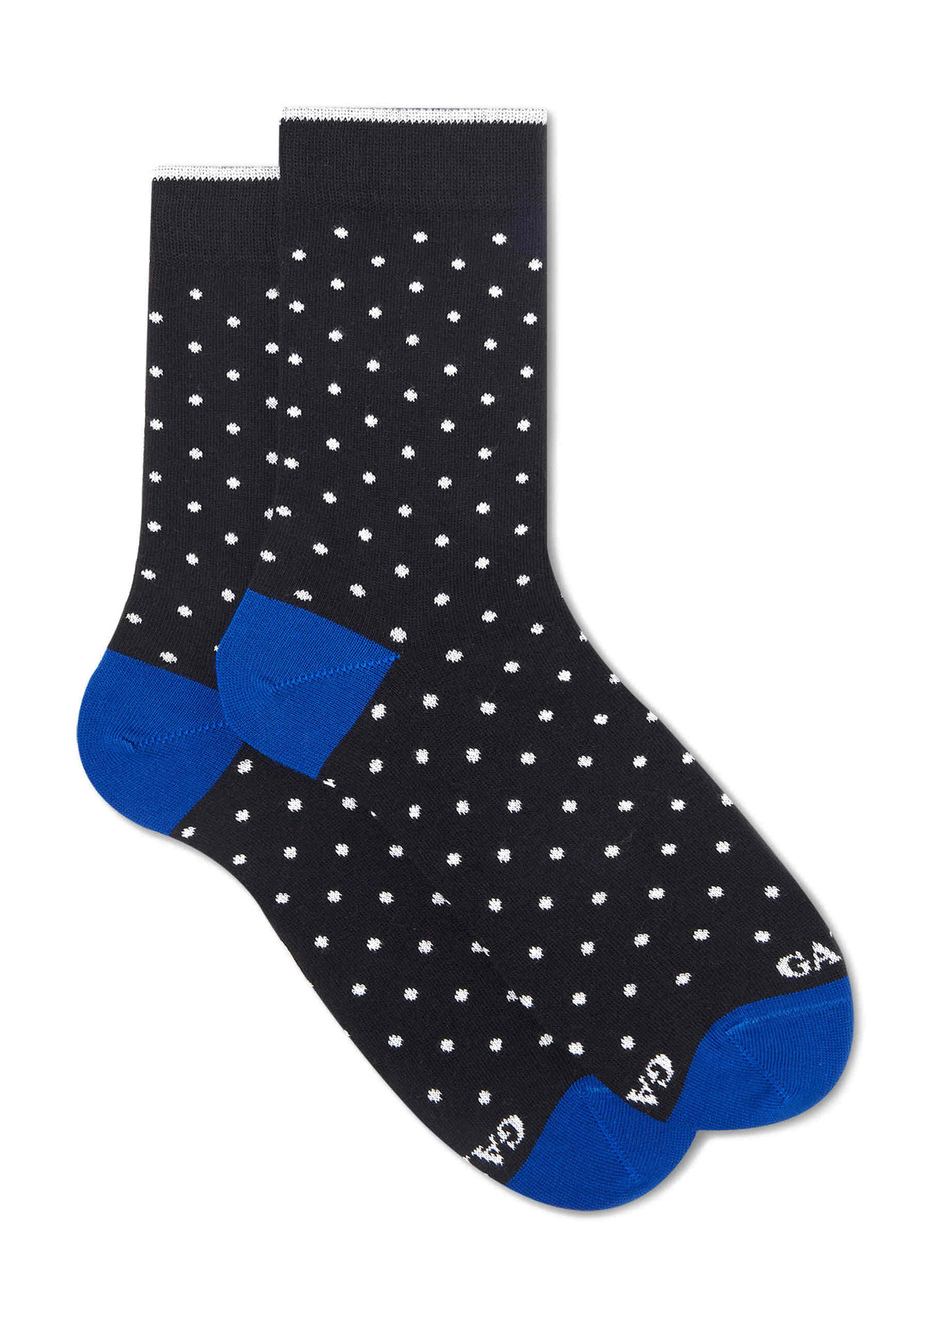 Women's short black cotton socks with polka dots - Gallo 1927 - Official Online Shop